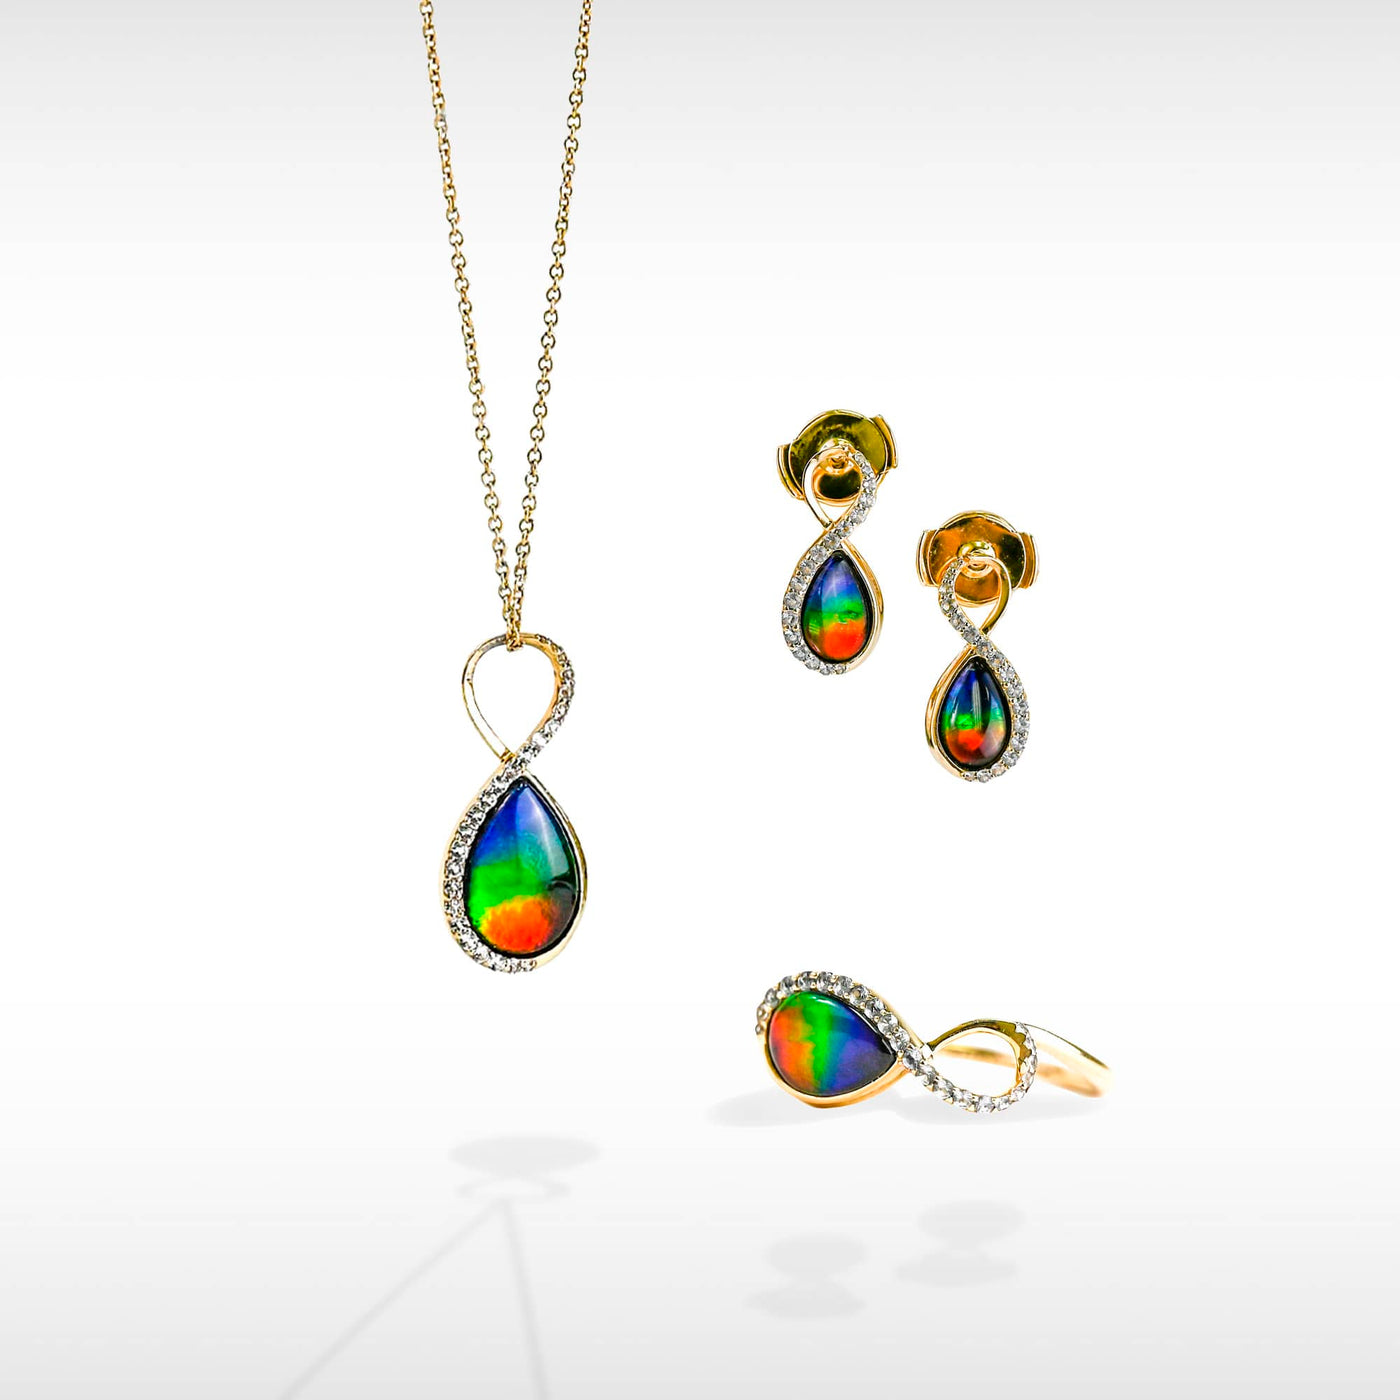 Infinity ammolite pendant, earring and ring set with white diamonds in 14K gold